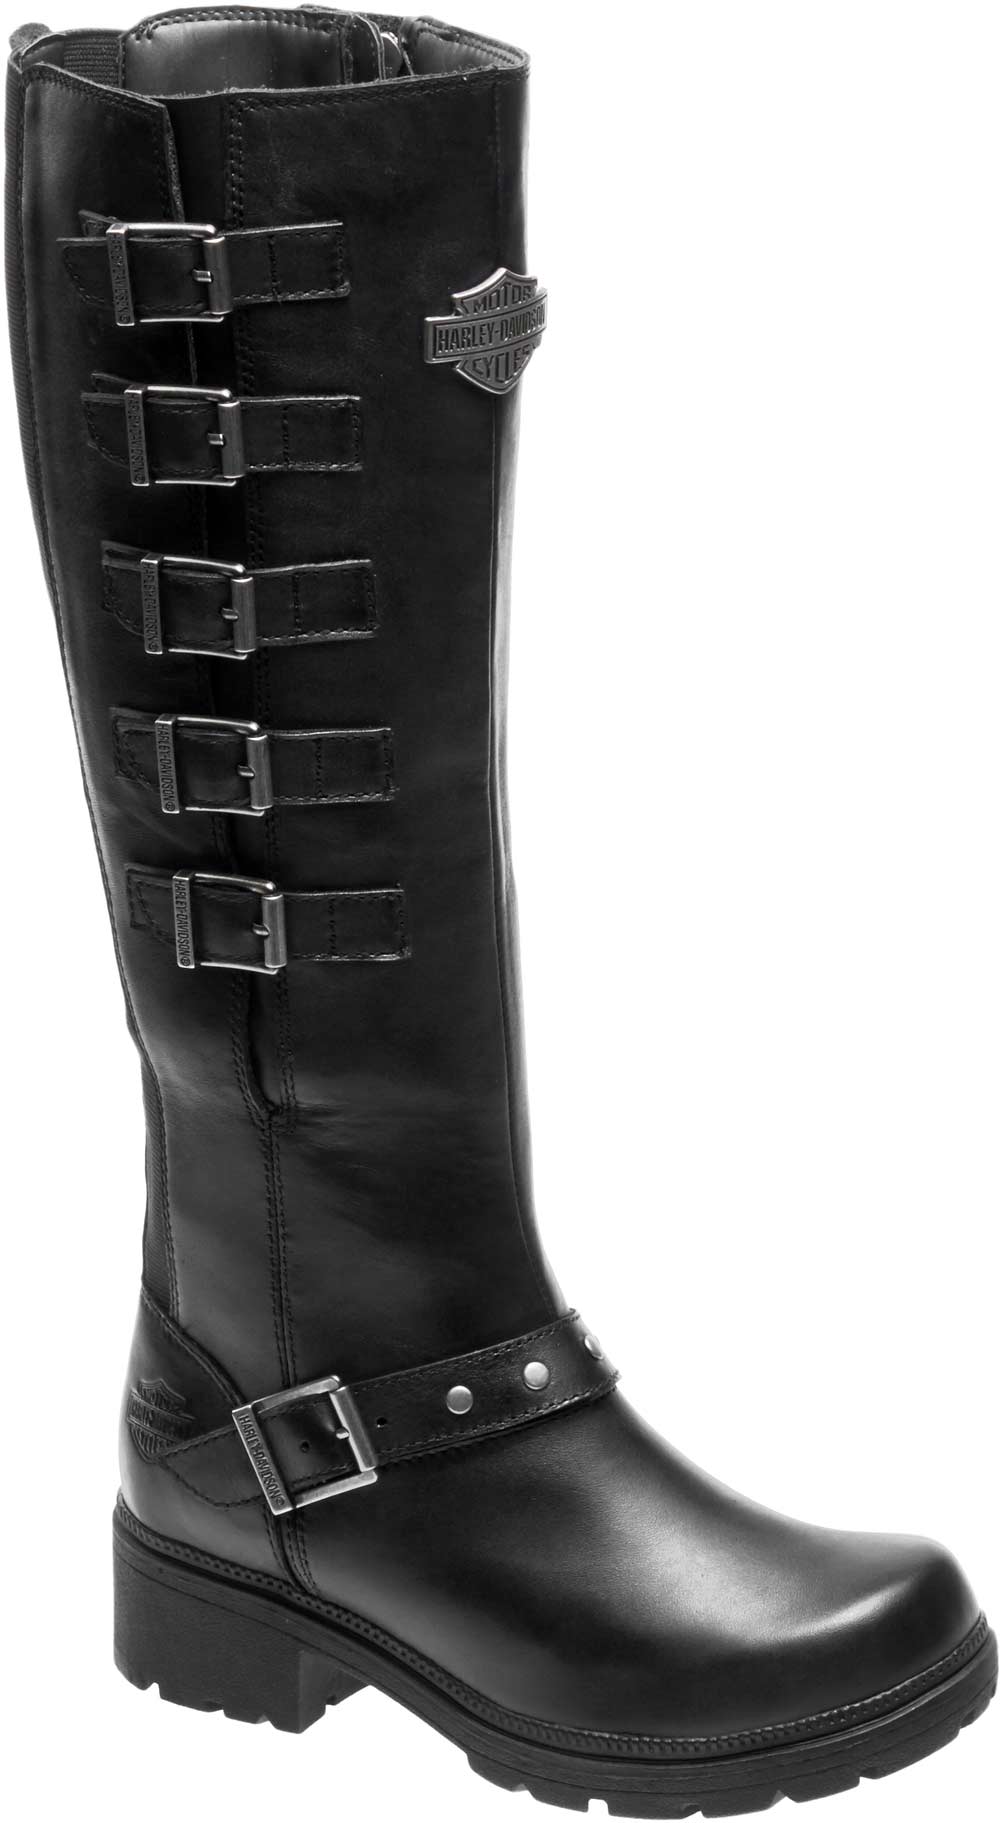 Black Mid-Calf Motorcycle Boots D84018 